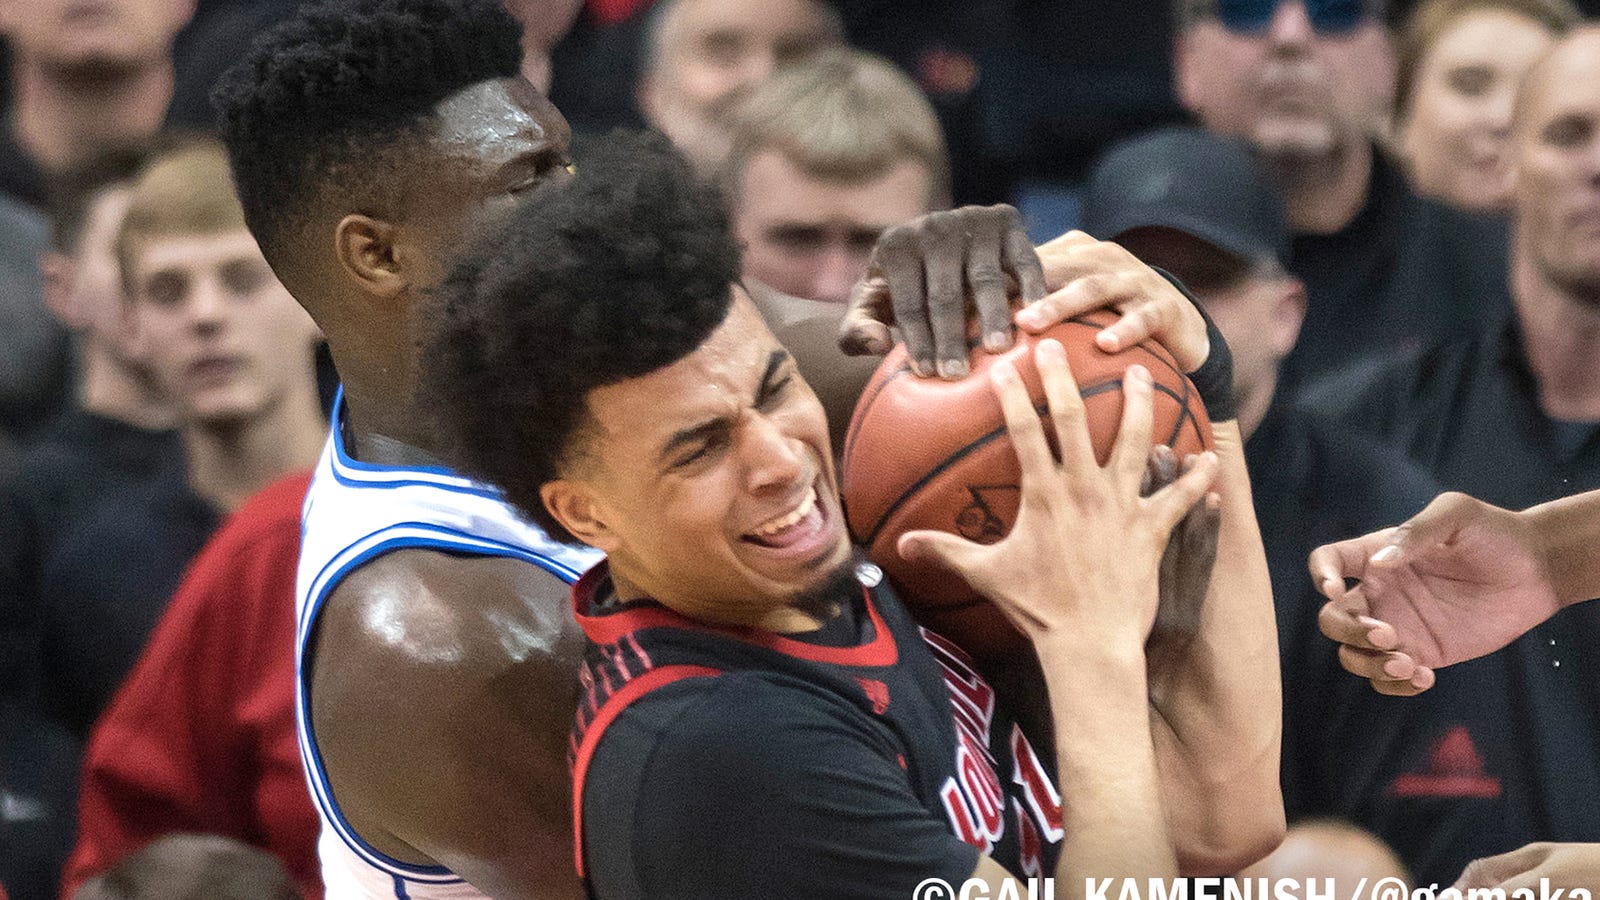 A Very Short Interview With The Photographer Who Captured Zion Williamson Denting A Basketball - Deadspin